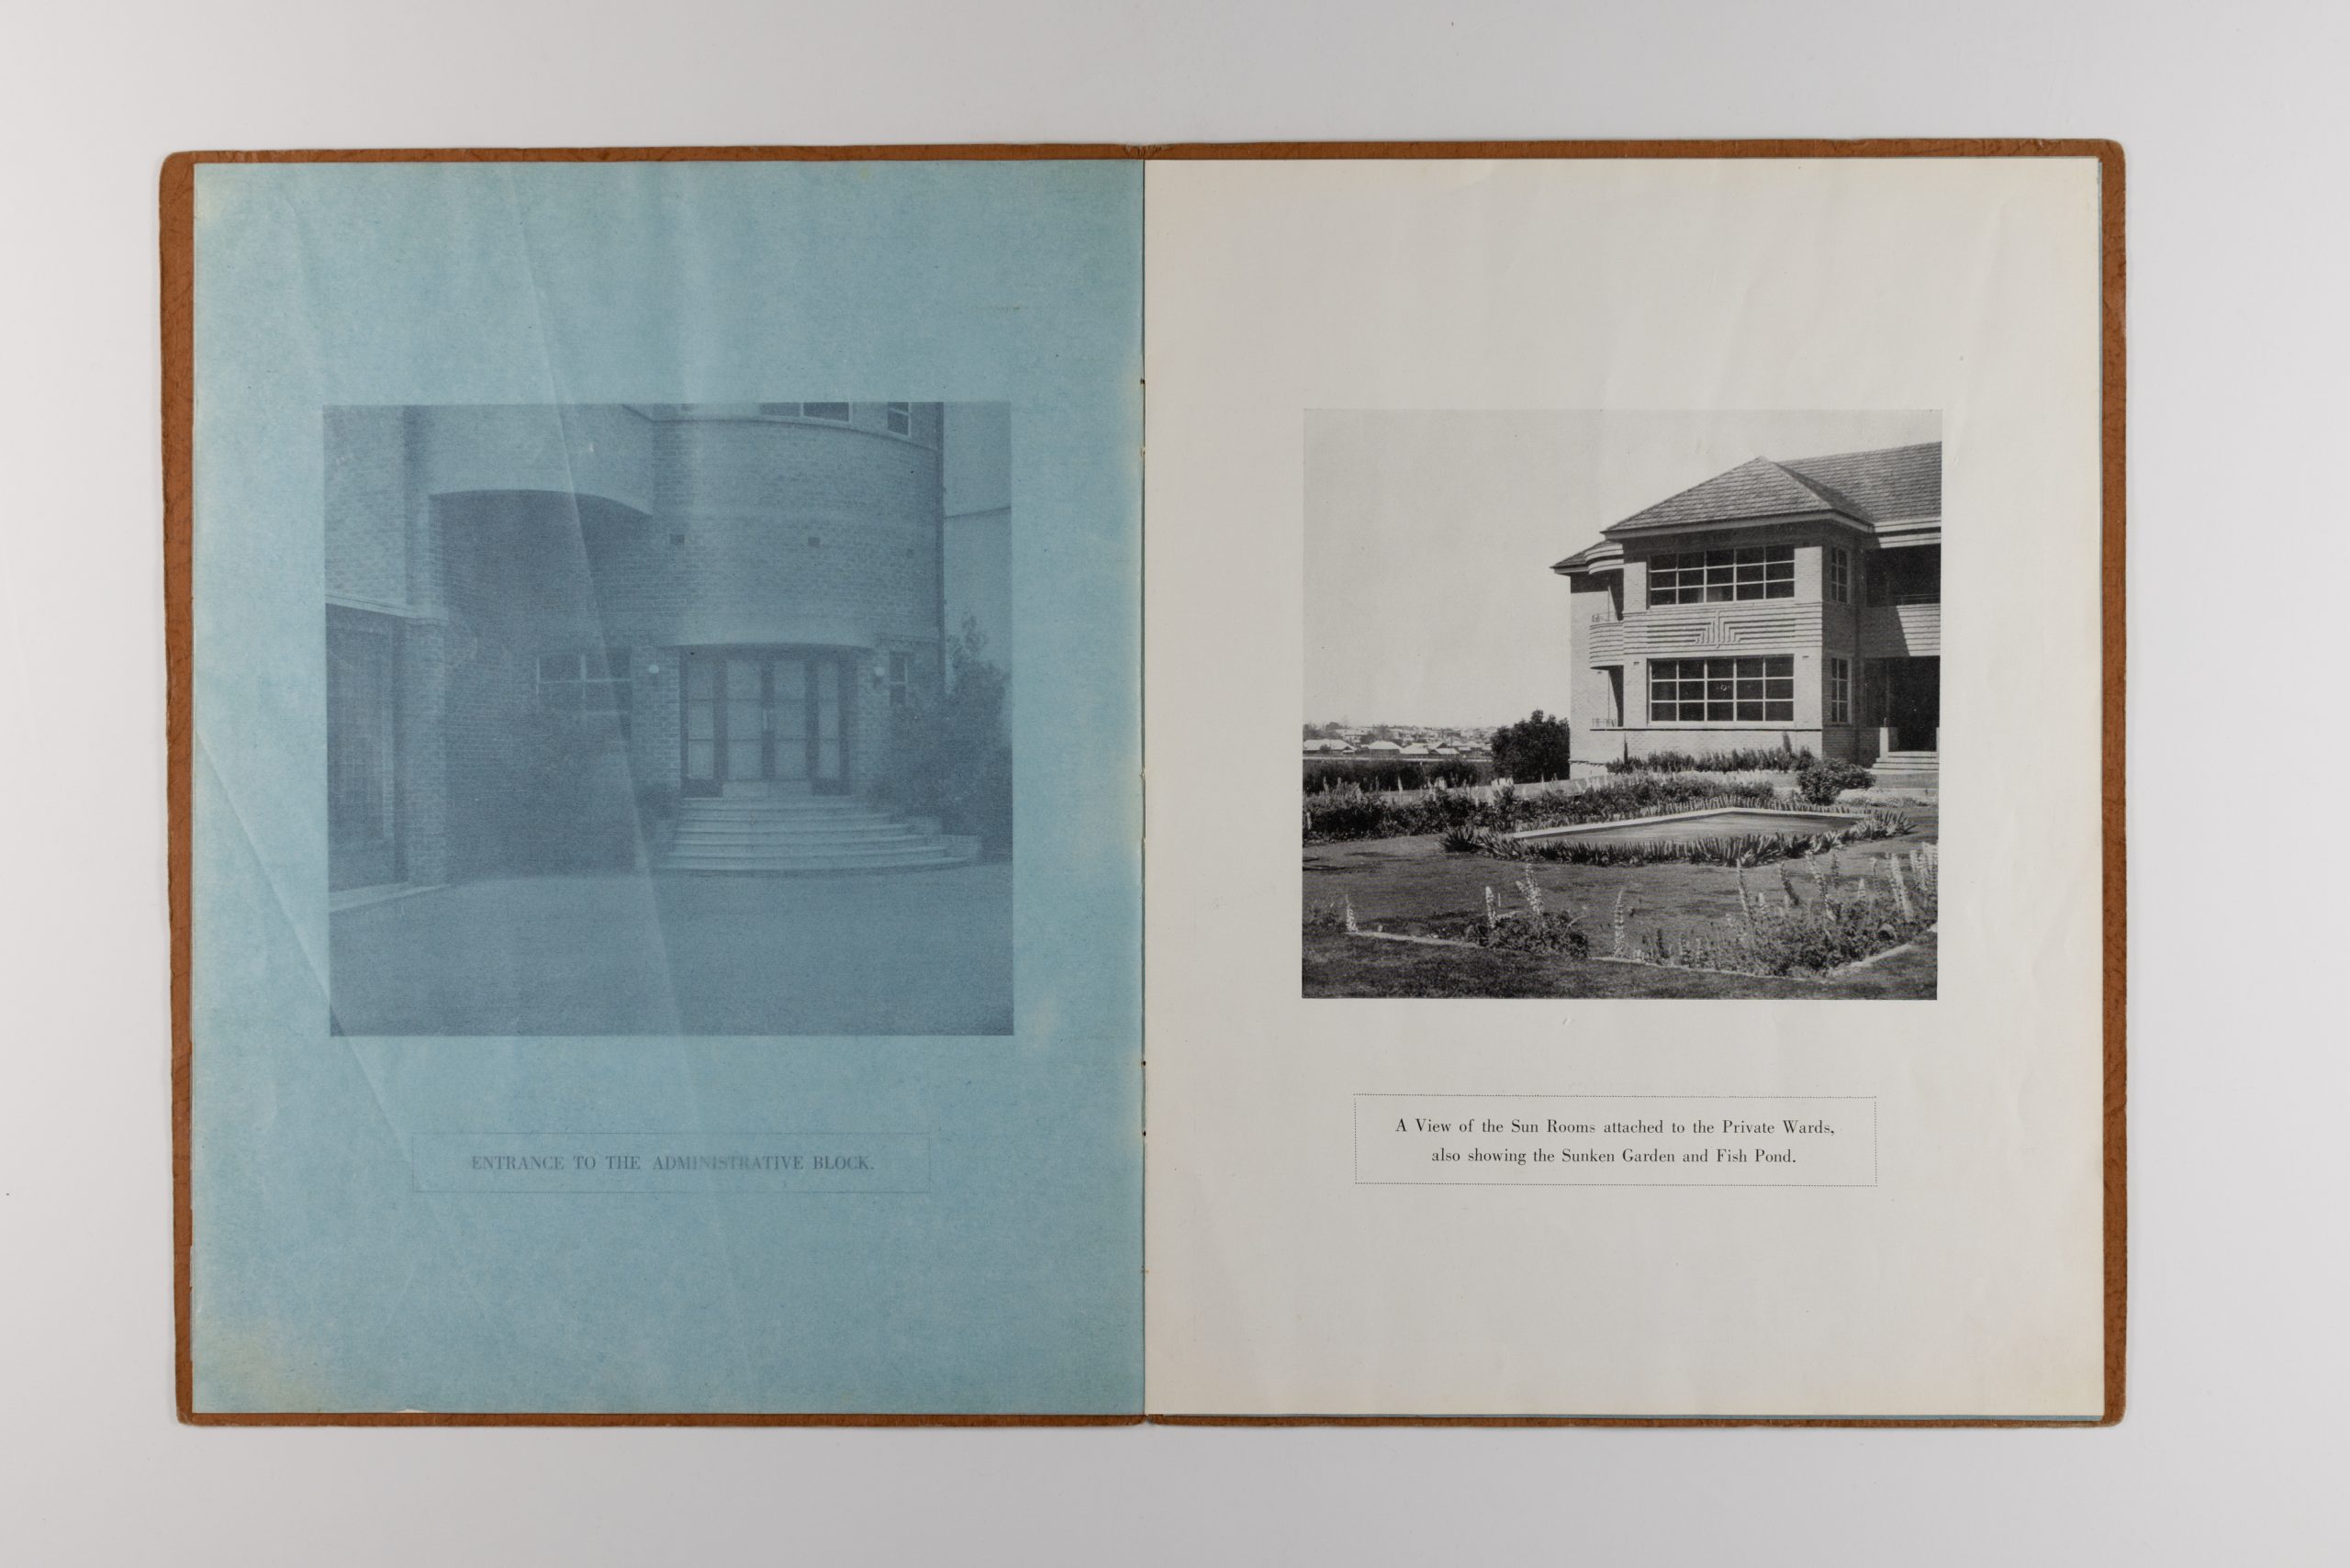 open pages of booklet, the left page is a semi-transparent blue page, the right page is a 'a view of the sun rooms attached to the Private Wards, also showing the Sunken Garden and Fish Pond.'